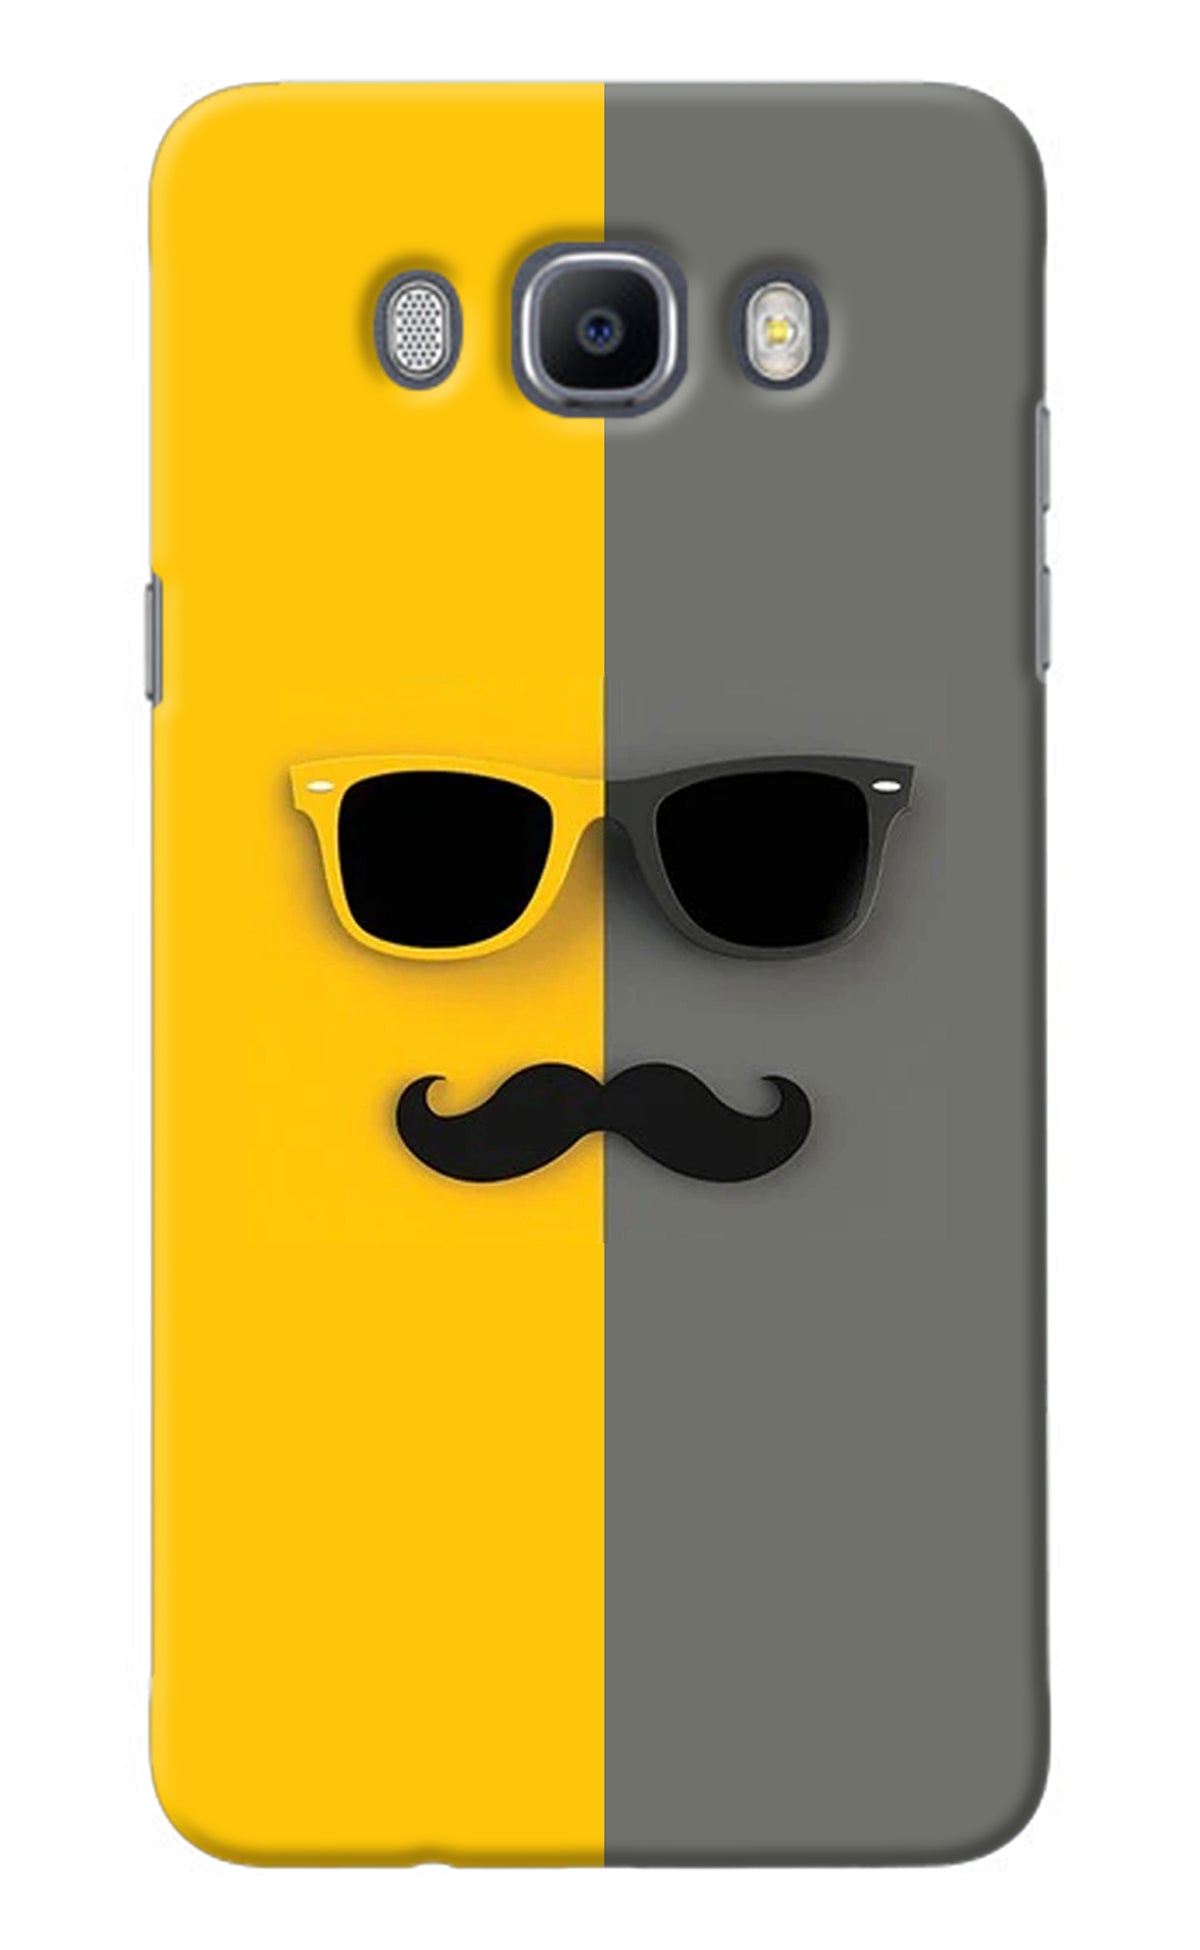 Sunglasses with Mustache Samsung J7 2016 Back Cover